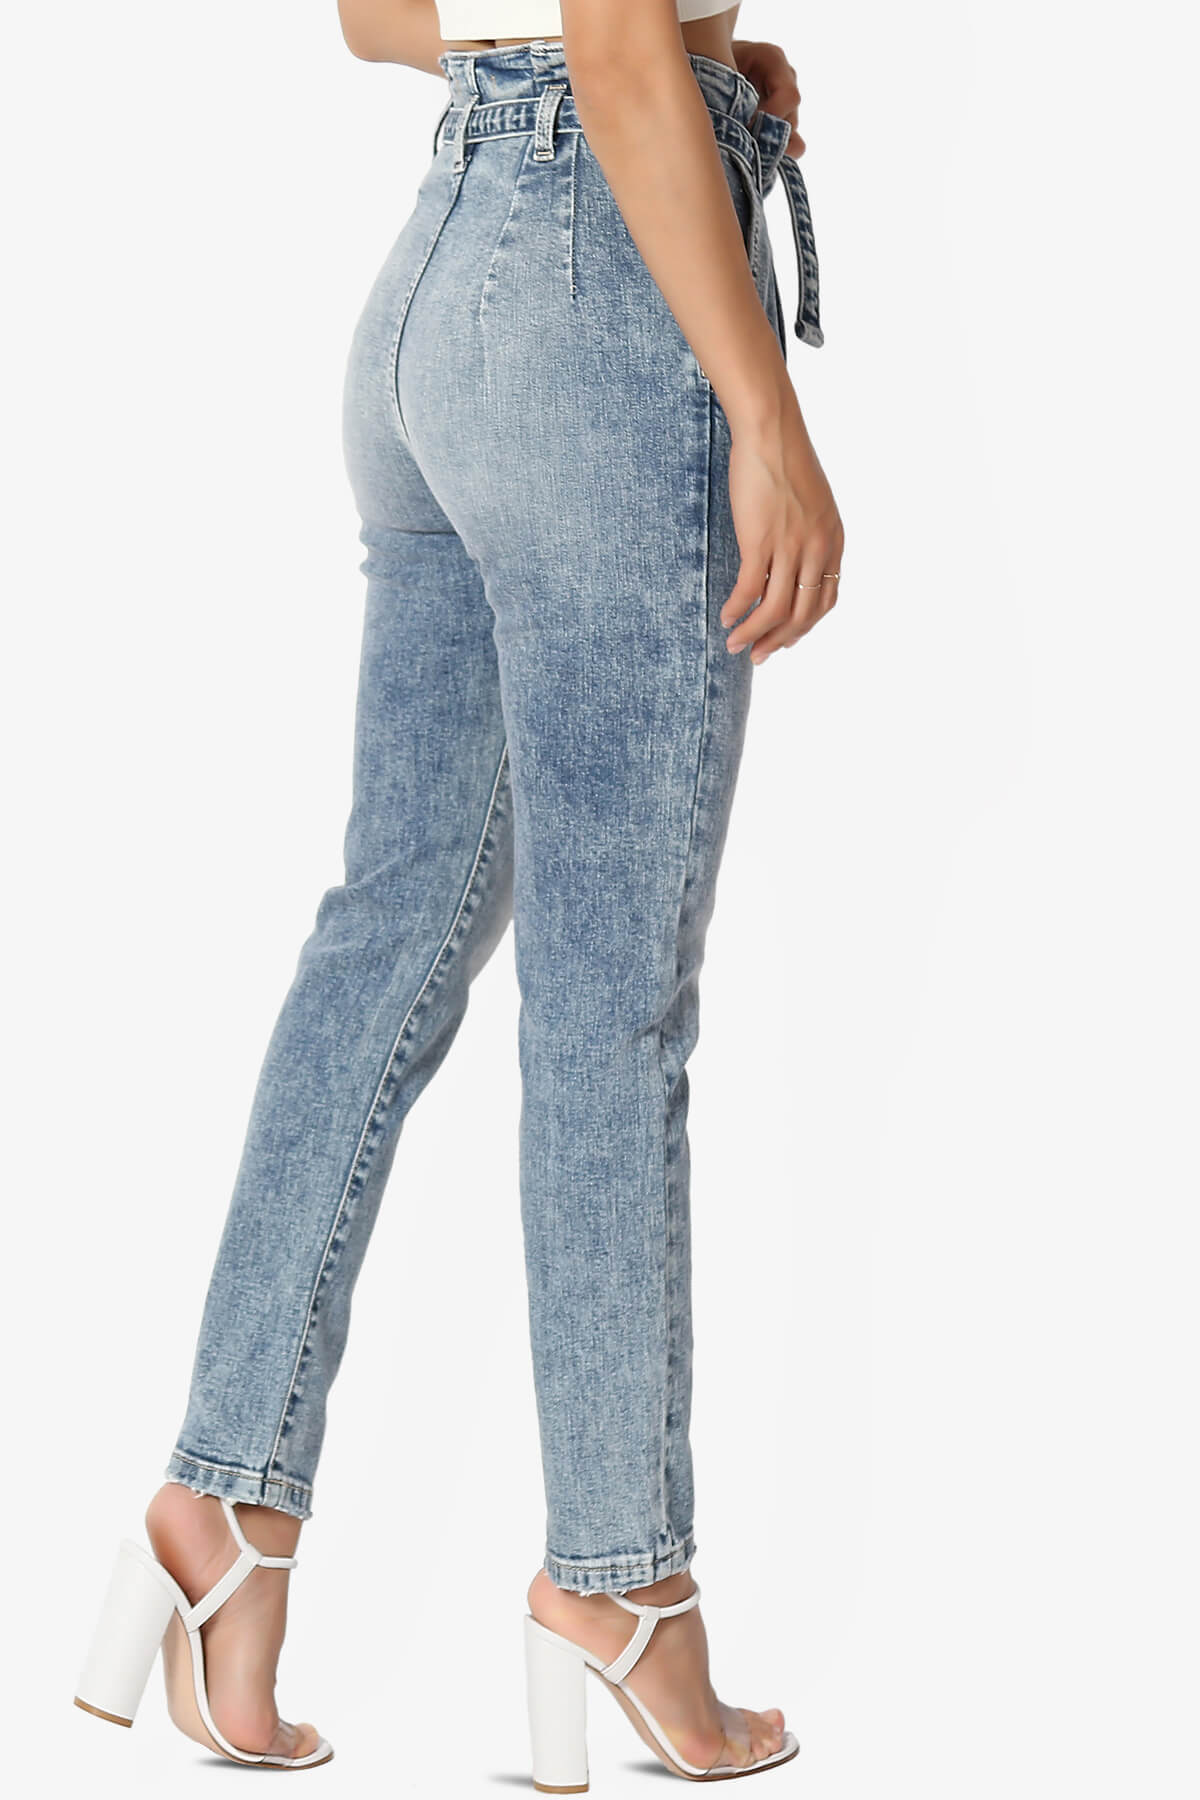 Load image into Gallery viewer, Tedi Paperbag High Waisted Mom Jeans LIGHT_4
